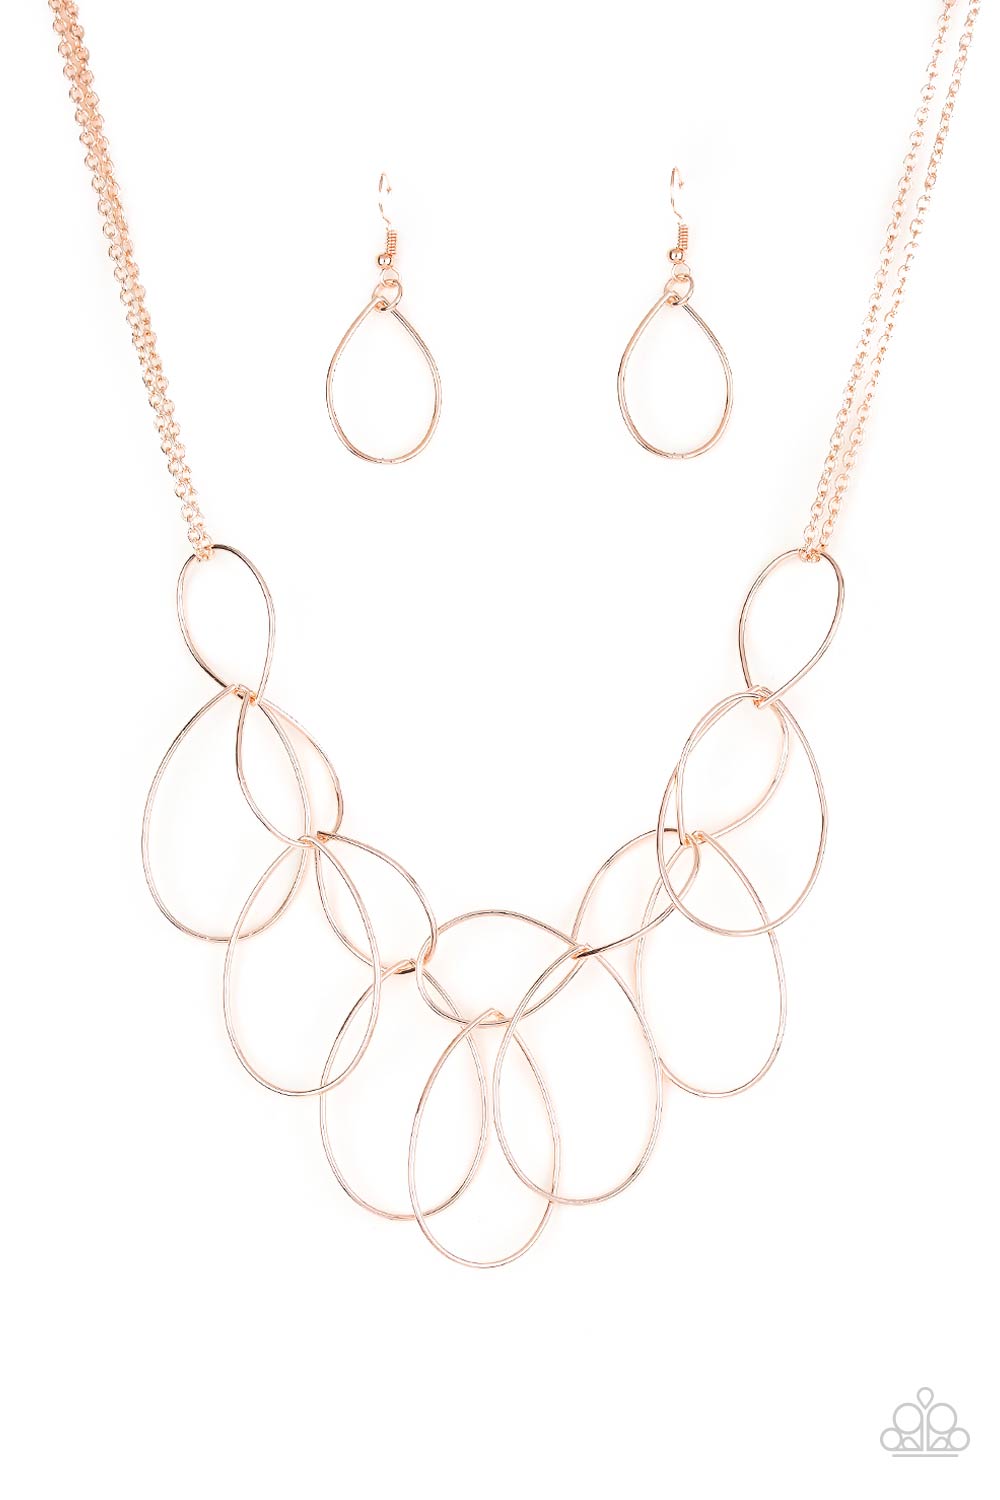 Paparazzi Top-TEAR Fashion - Rose Gold Necklace - A Finishing Touch Jewelry